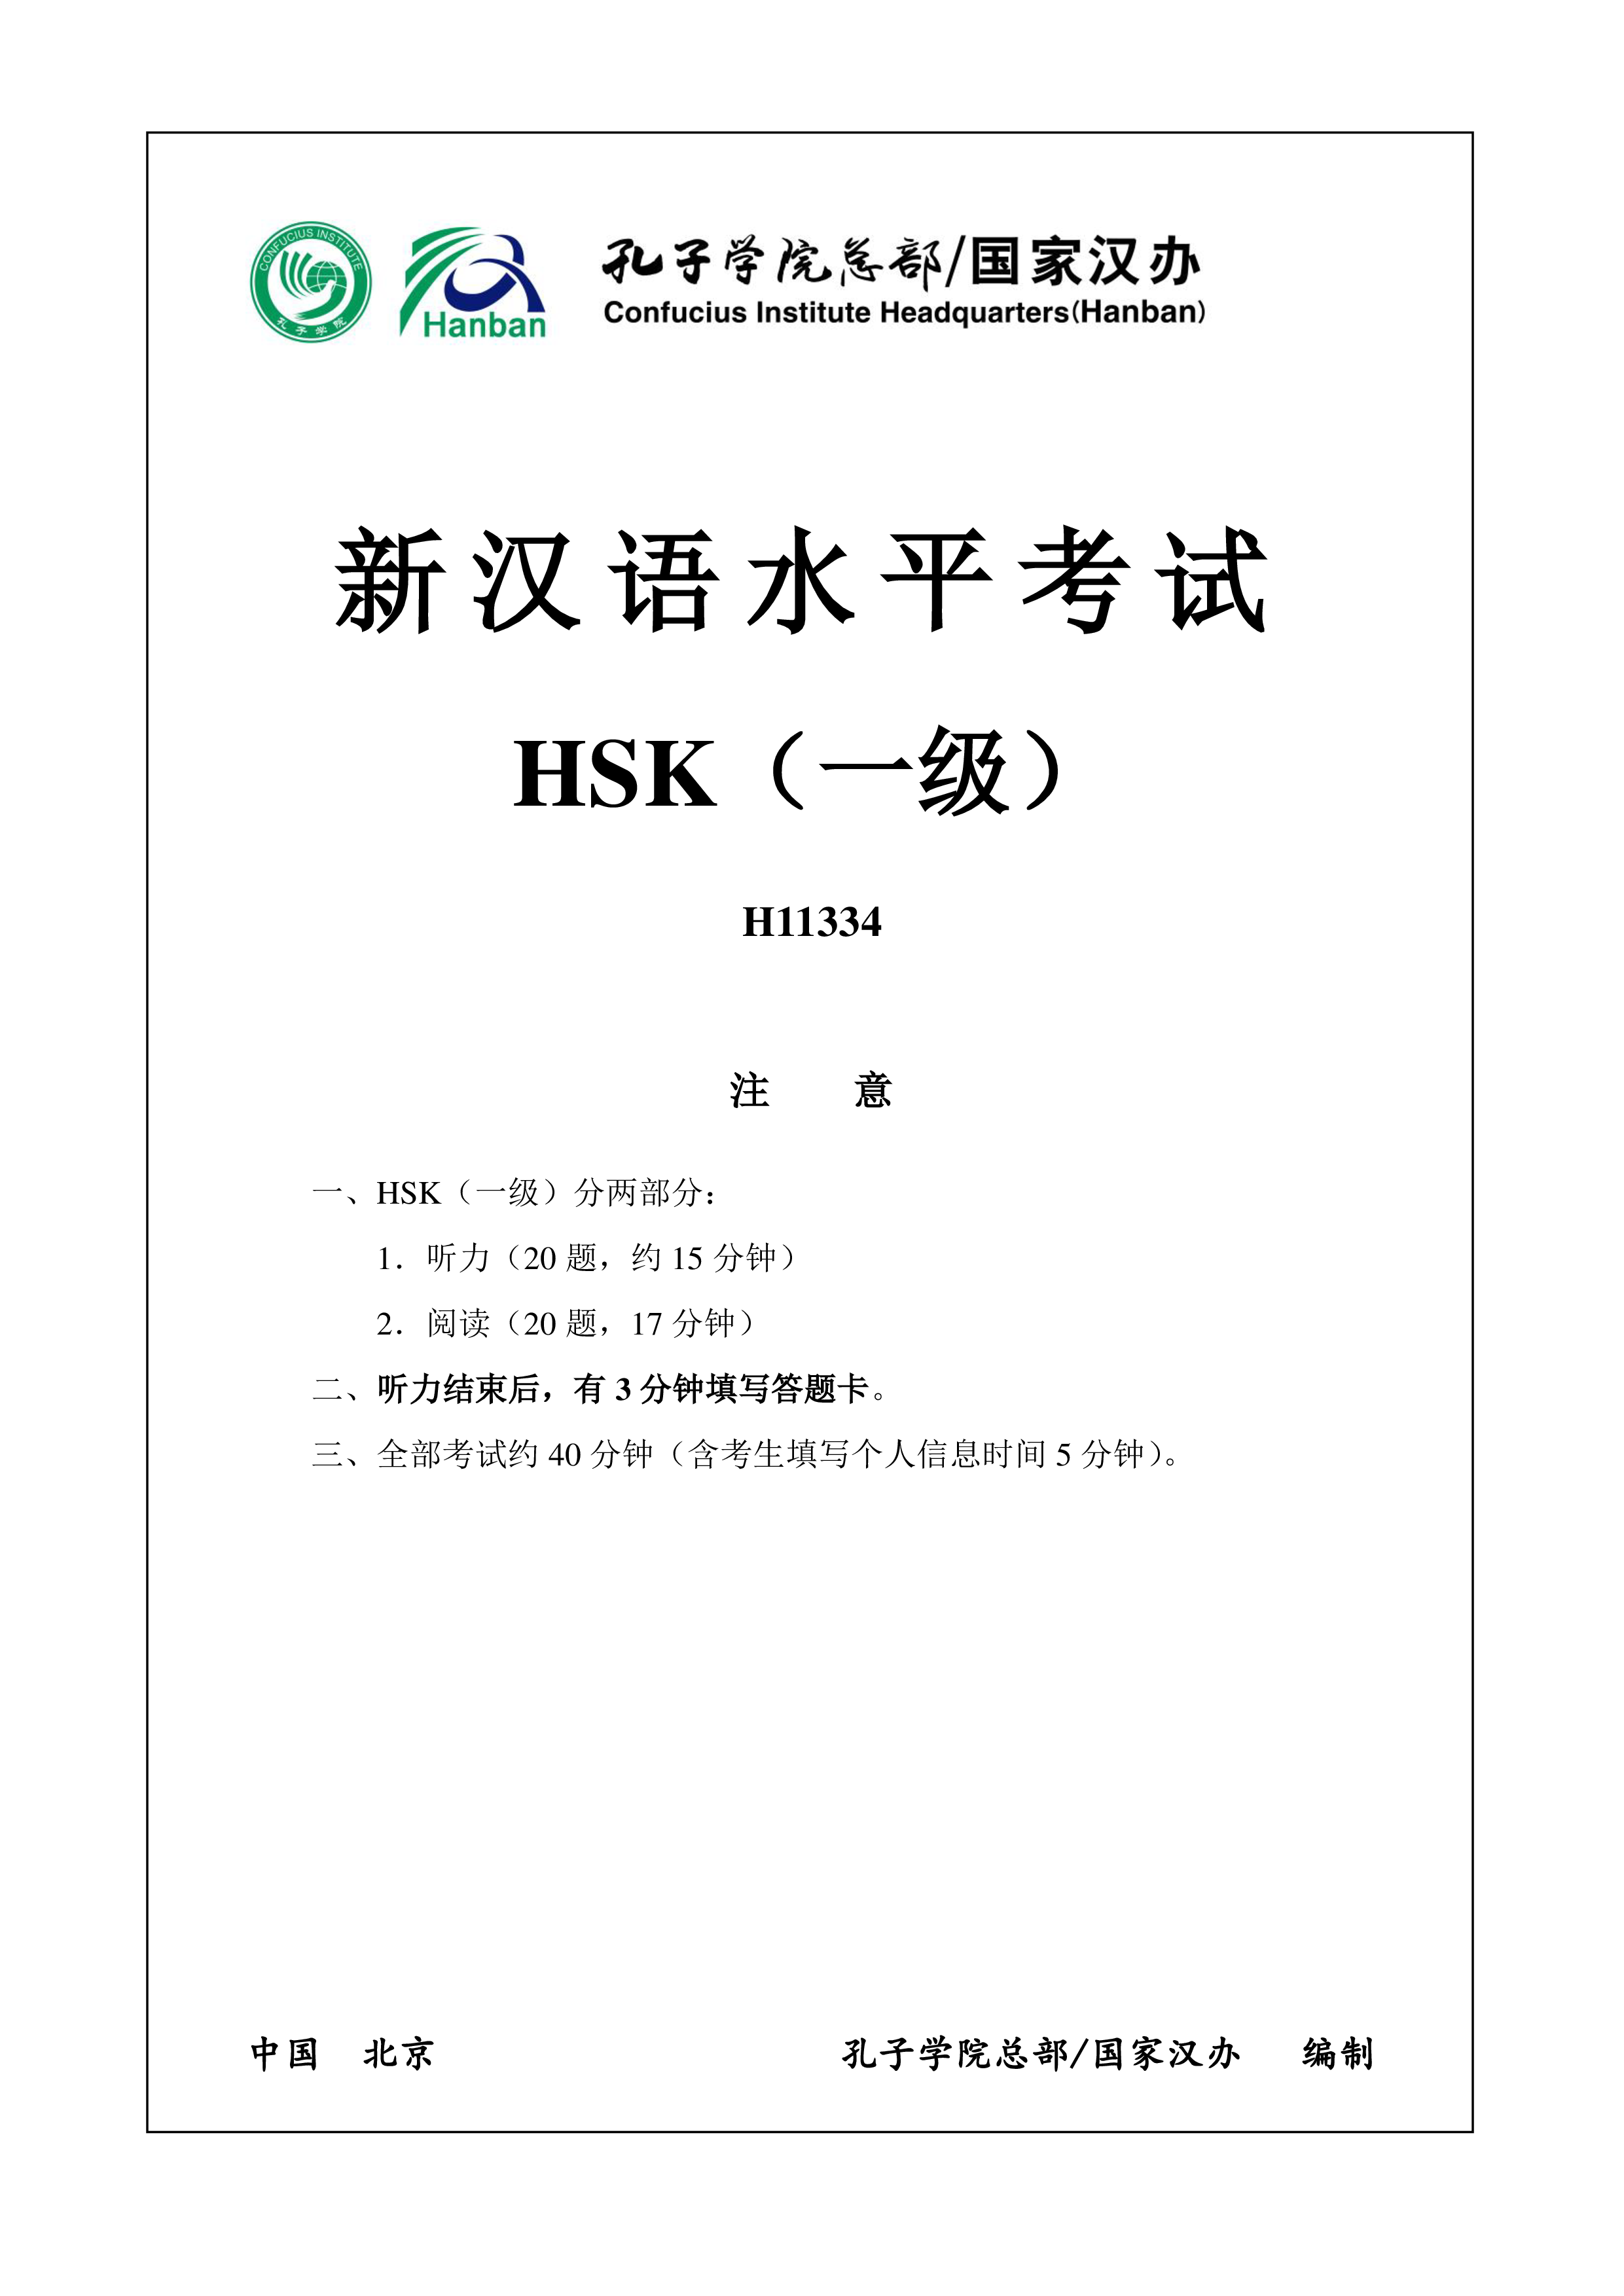 hsk1 chinese exam including answers # hsk1 h11334 template